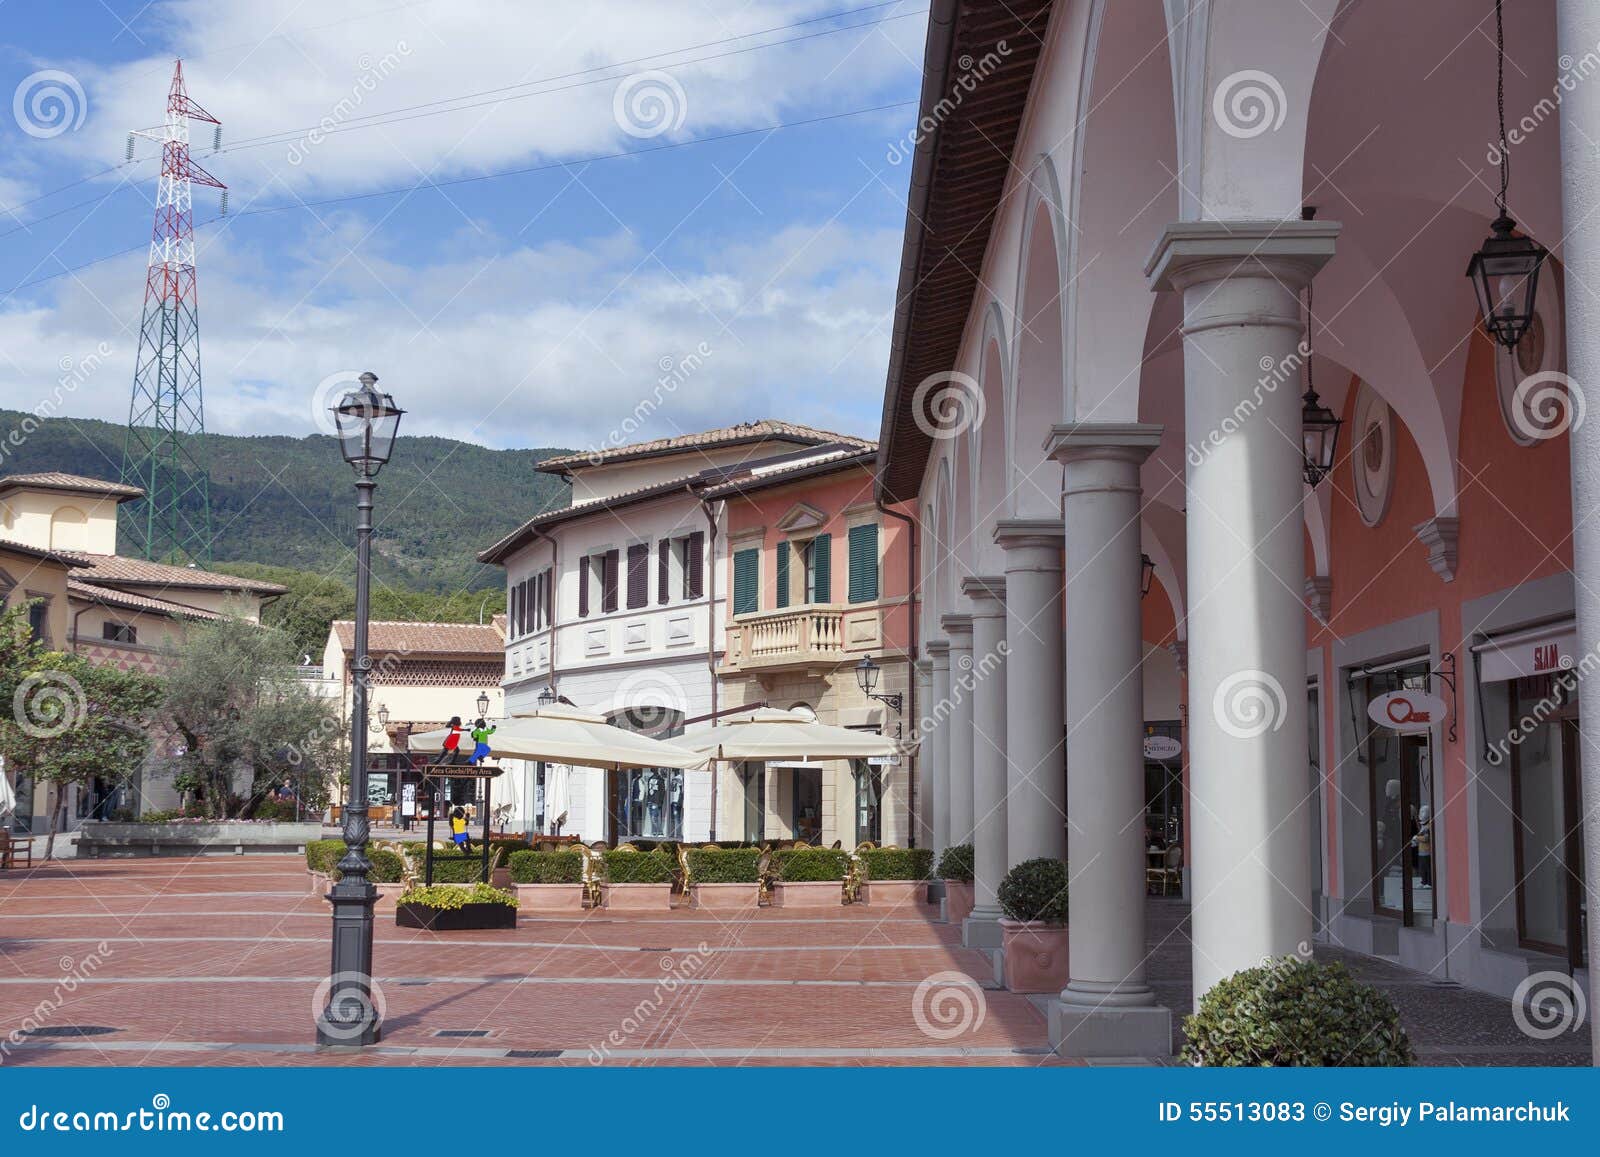 McArthurGlen Designer Outlet Barberino In Italy Editorial Stock Photo - Image of sale, consumer ...